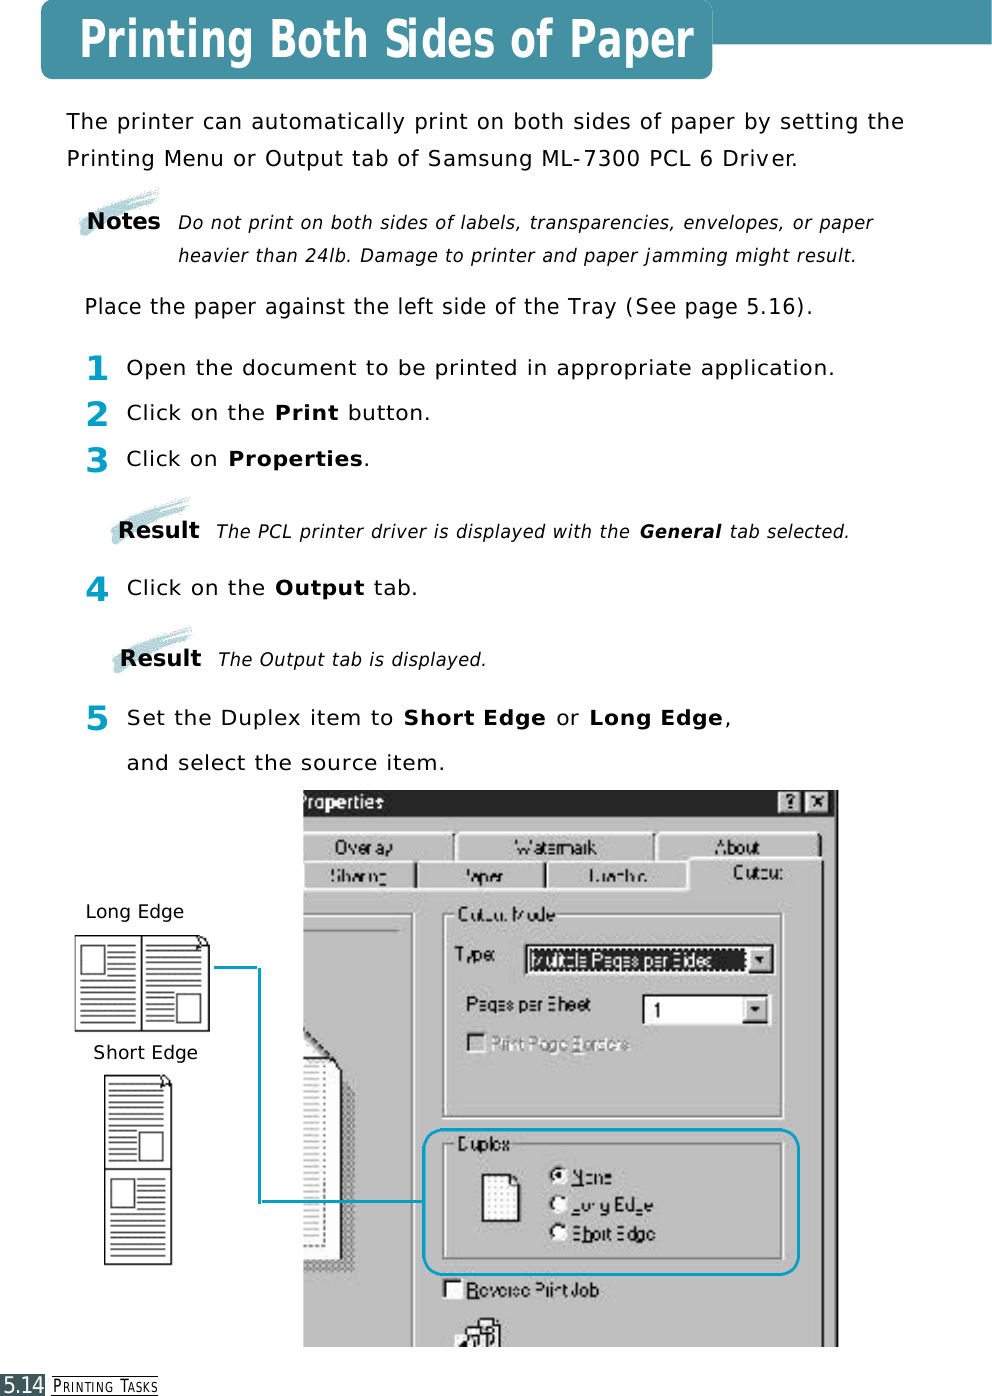 PR I N T I N G TA S K S5.14The printer can automatically print on both sides of paper by setting the Printing Menu or Output tab of Samsung ML-7300 PCL 6 Drive r.1 Open the document to be printed in appropriate application.2 Click on the P r i n t b u t t o n .3 Click on P r o p e r t i e s .4 Click on the O u t p u t t a b.5 Set the Duplex item to Short Edge or Long Edge, and select the source item.Place the paper against the left side of the Tray (See page 5.16).Long EdgeShort EdgePrinting Both Sides of PaperNotes  Do not print on both sides of labels, transparencies, envelopes, or paperheavier than 24lb. Damage to printer and paper jamming might result.Result  The PCL printer driver is displayed with the G e n e r a l tab selected.Result  The Output tab is displayed.